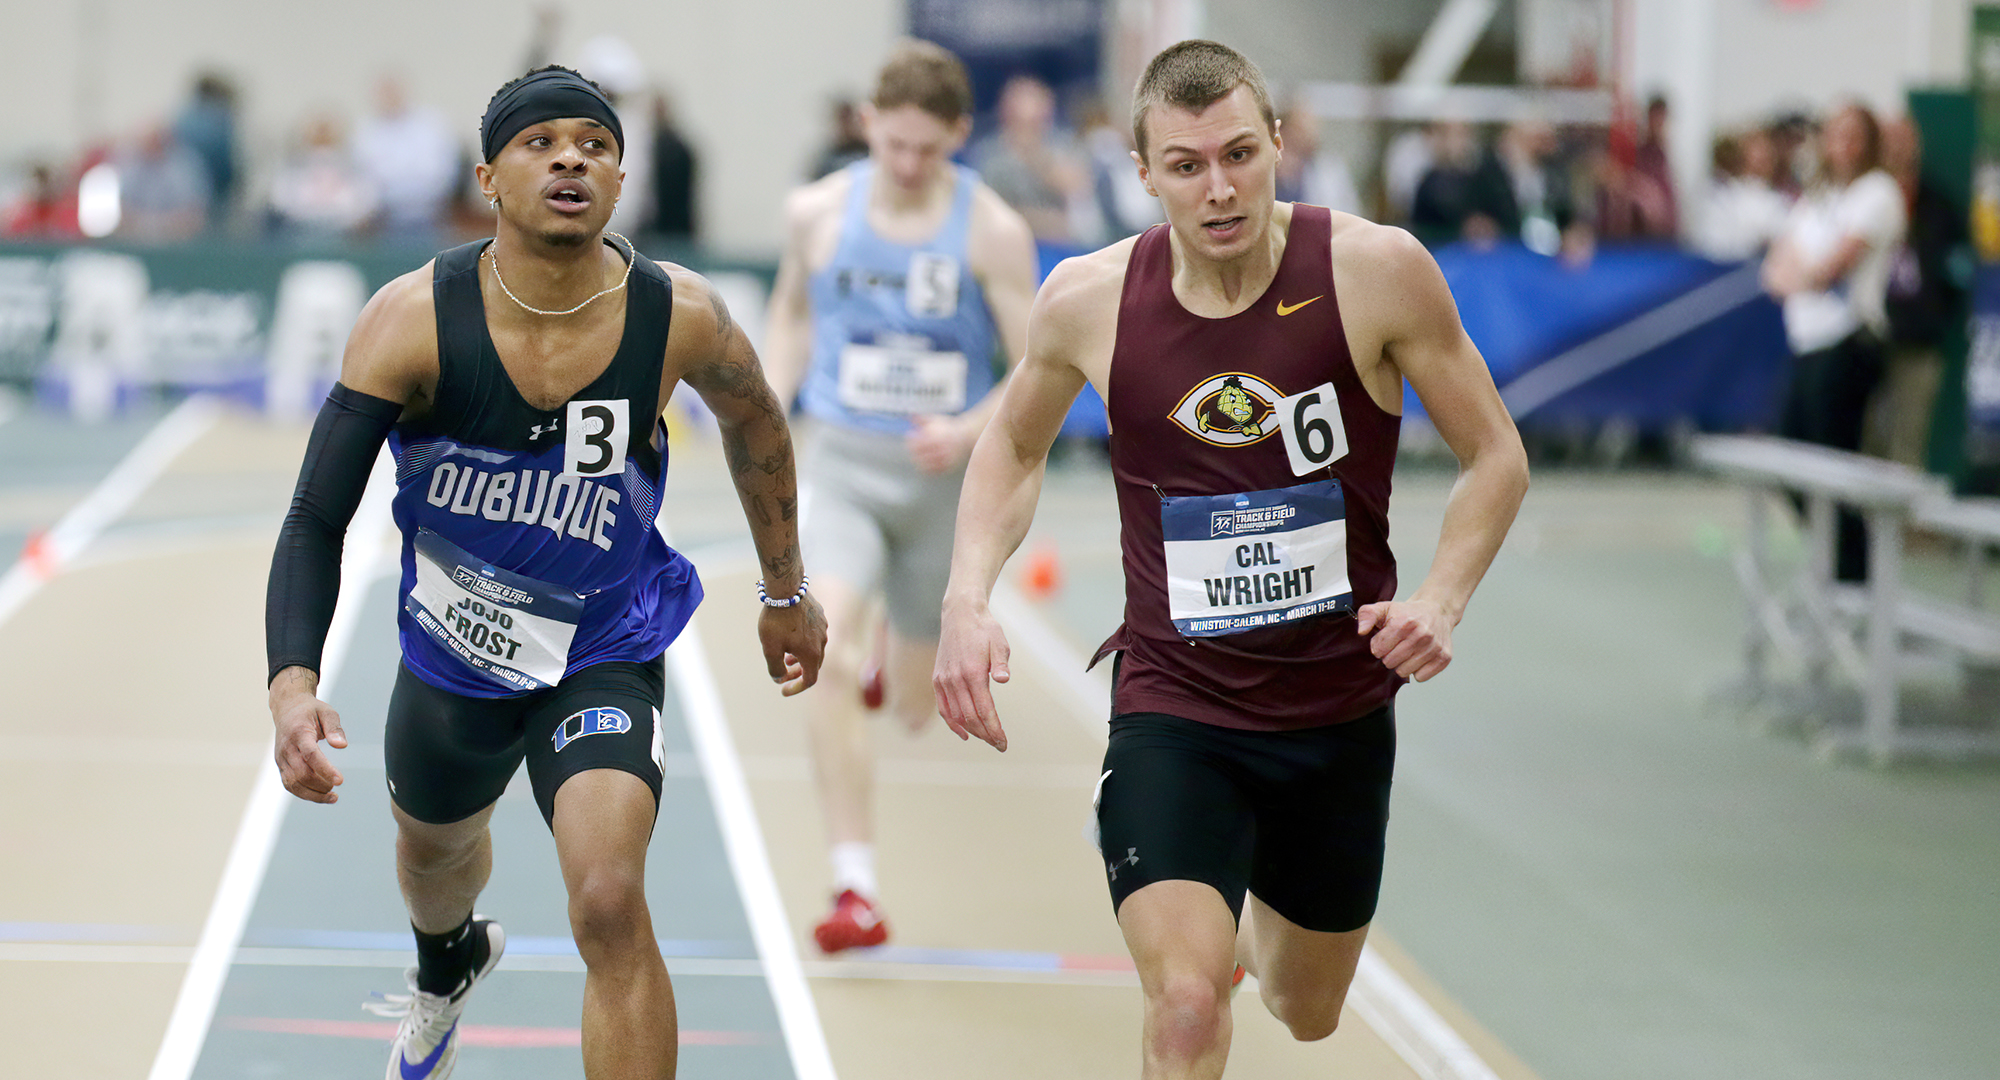 Senior Cal Wright got his groove back after a season-ending hamstring injury in 2021, and is set to compete at the NCAA Division III Outdoor Meet.